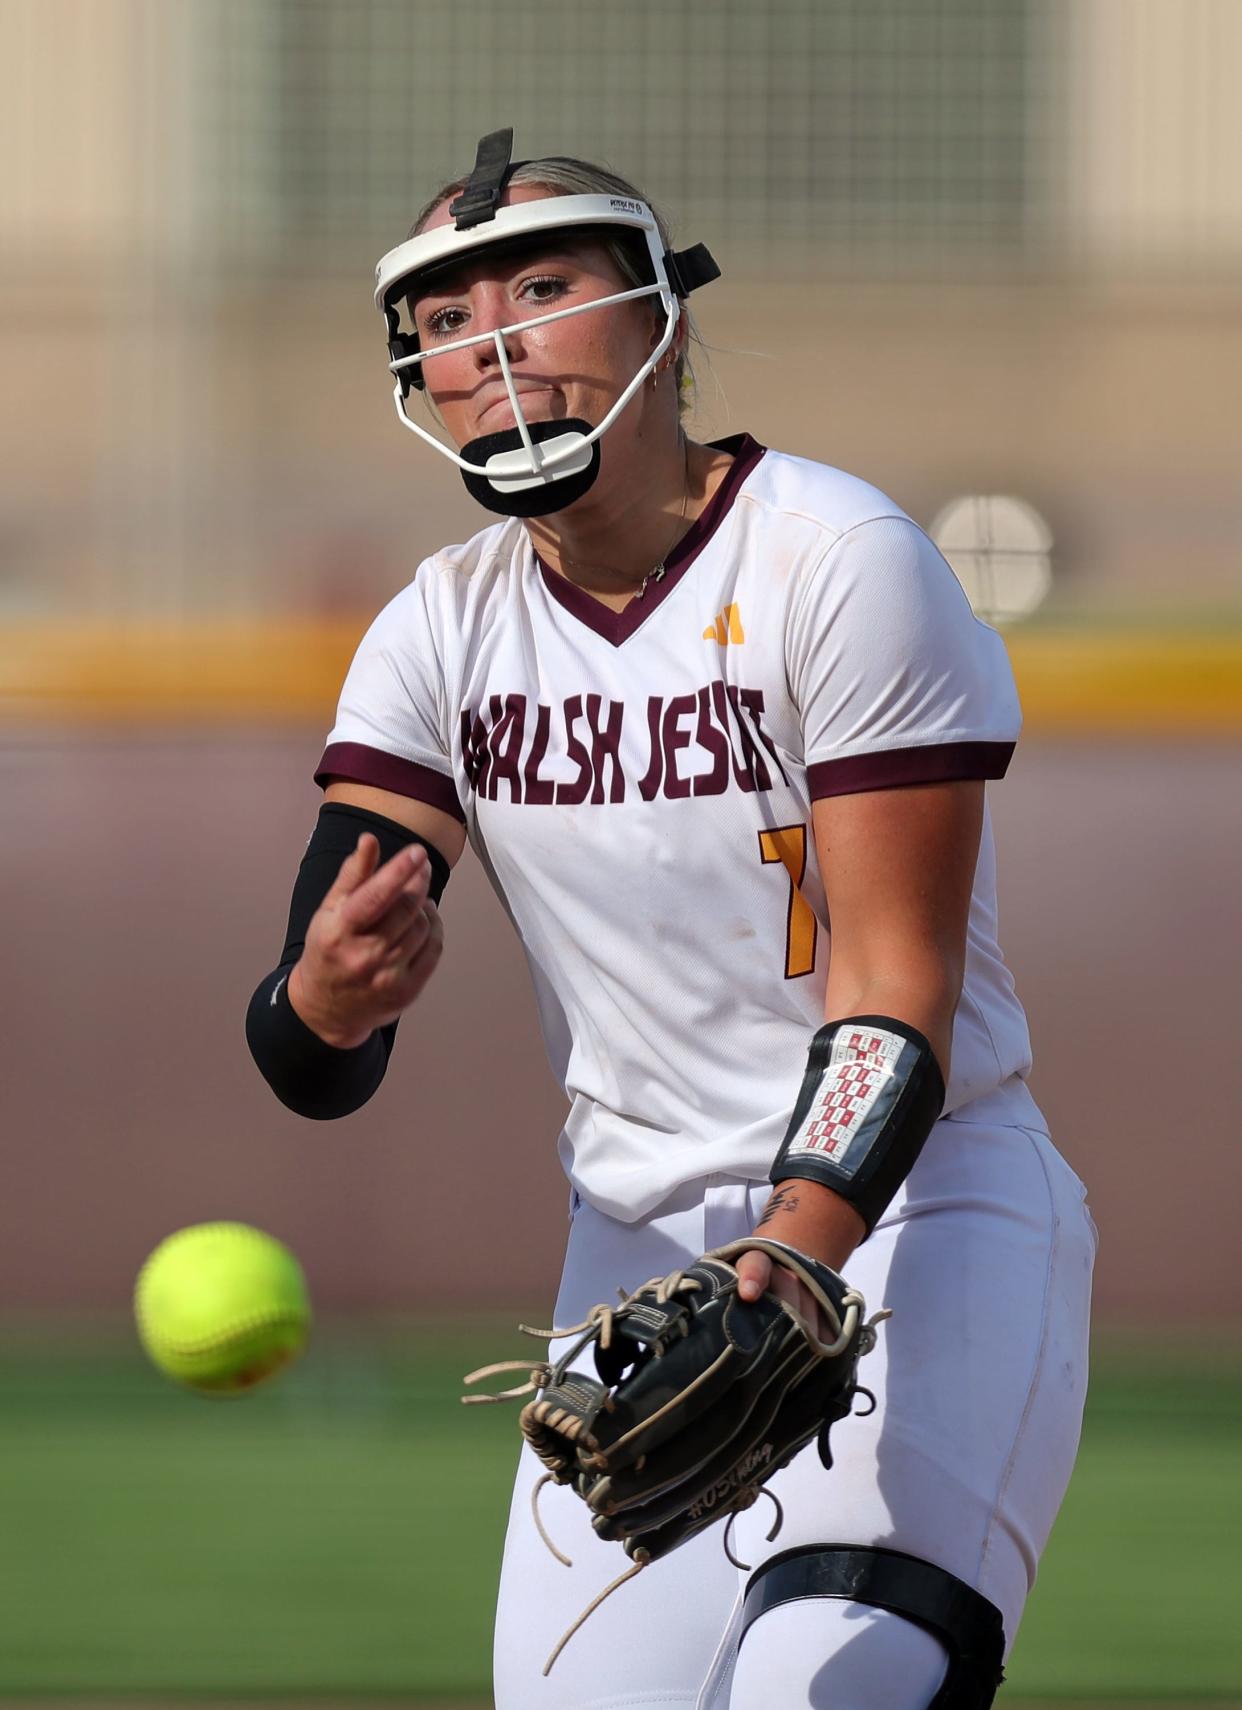 Walsh Jesuit right-hander Natalie Susa has a perfect game and no-hitter under her belt this season.